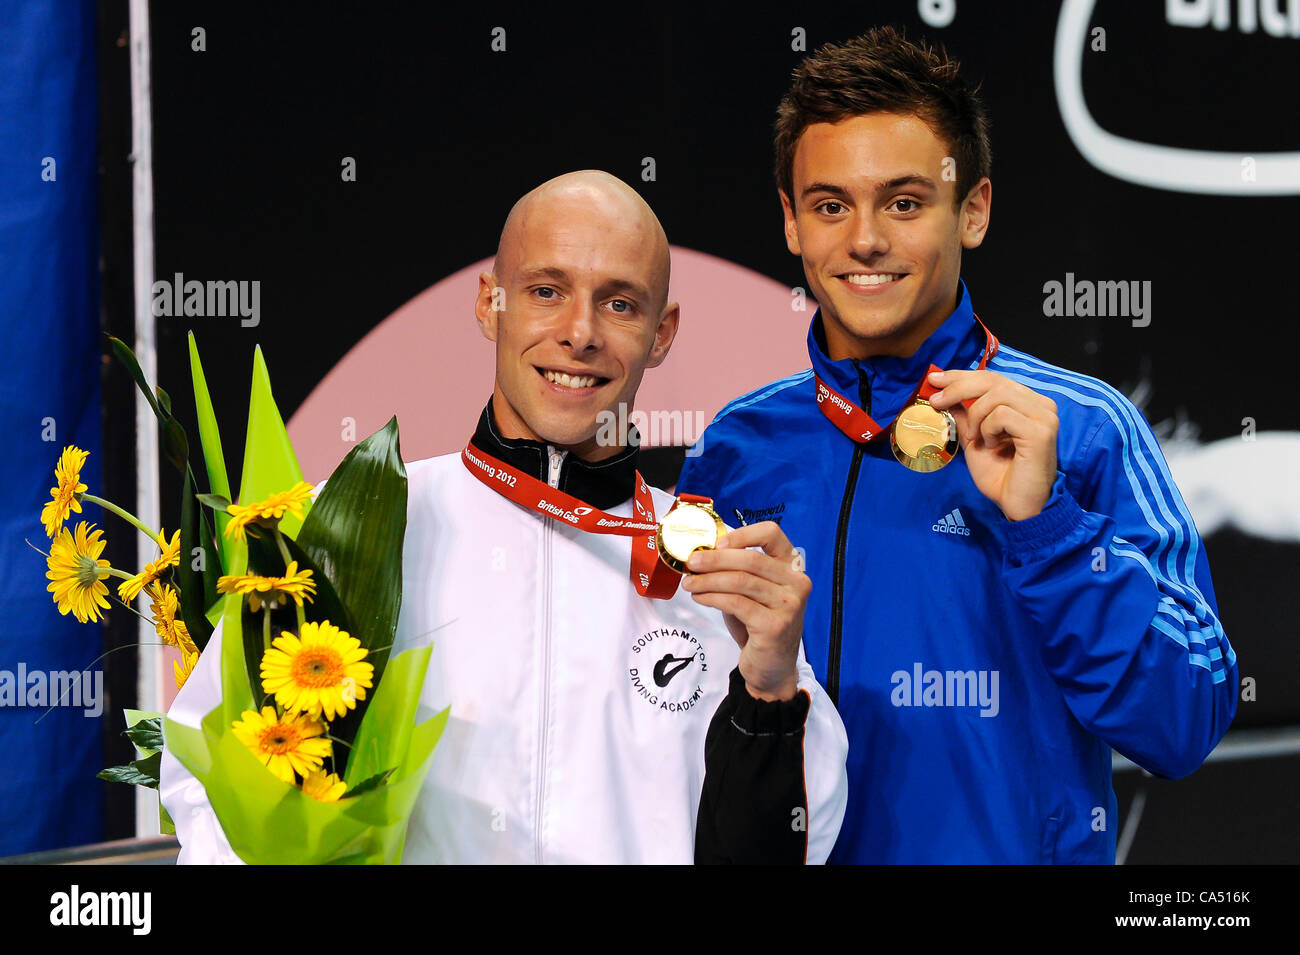 08.06.2012 Sheffield, England. Thomas Daley and Peter Waterfield (Plymouth Diving and Southampton DA) pose with their Gold Medals after winning the Mens 10m Synchro Platform Final on Day 1 of the 2012 British Gas Diving Championships (and Team GB Olympic Squad Selection Trials) at Ponds Forge Intern Stock Photo